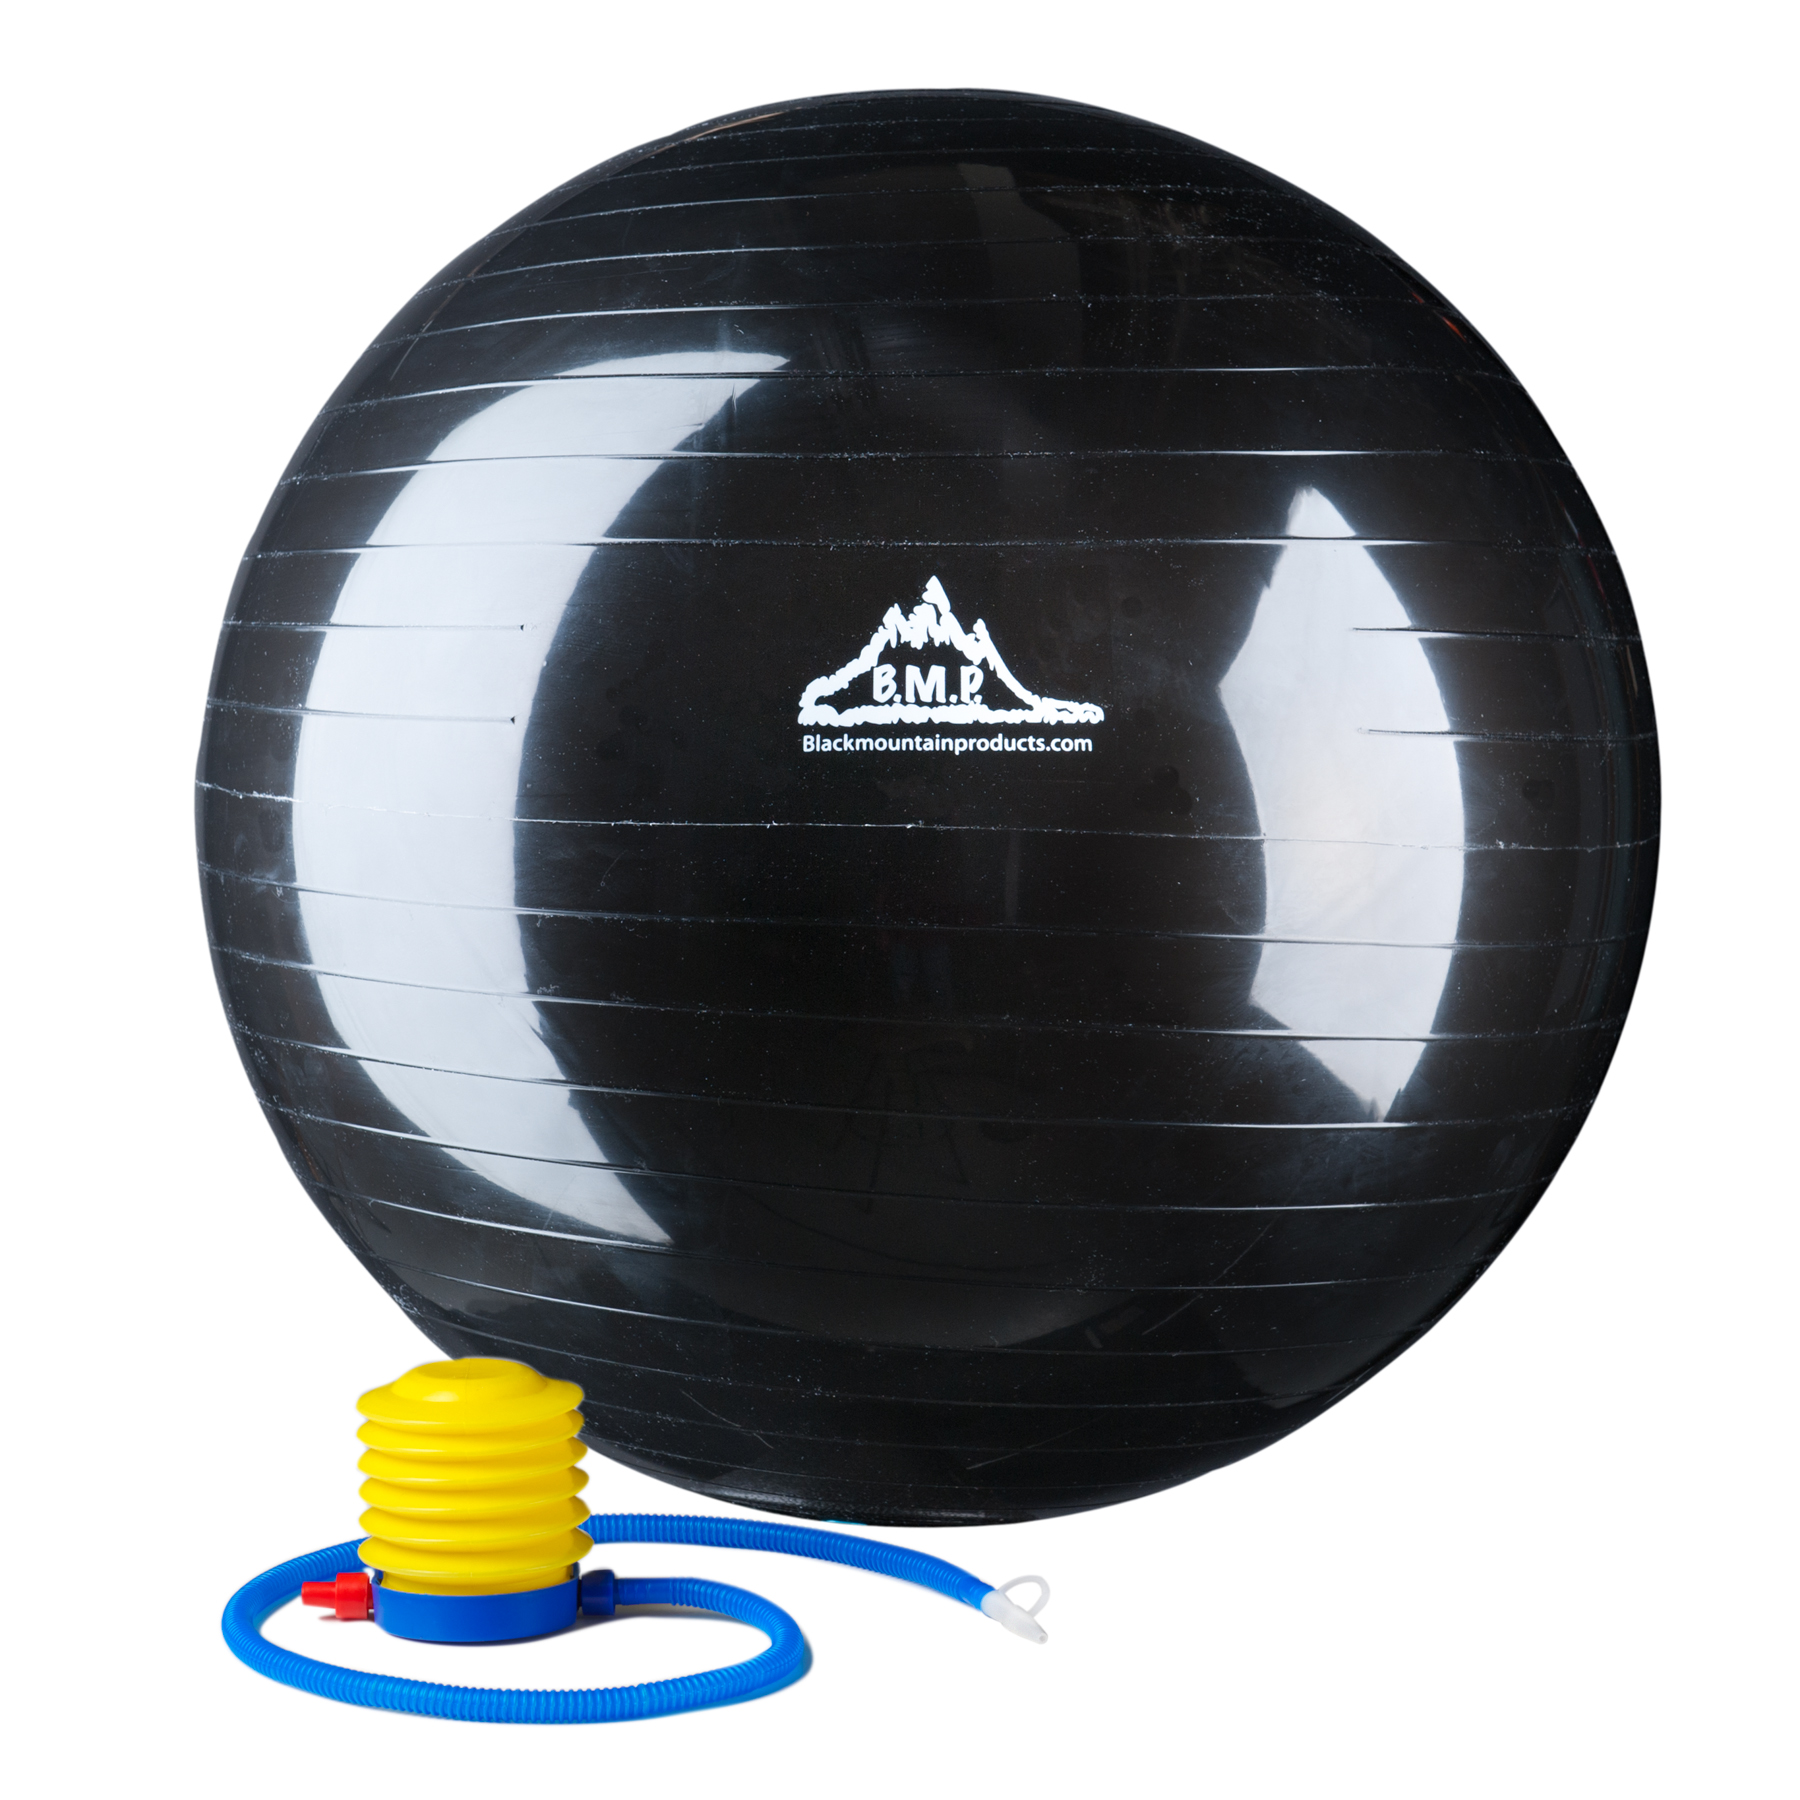 Black Mountain Products 2000 Lbs. Static Strength Exercise Stability Ball with Pump, 45 cm Black - image 1 of 7